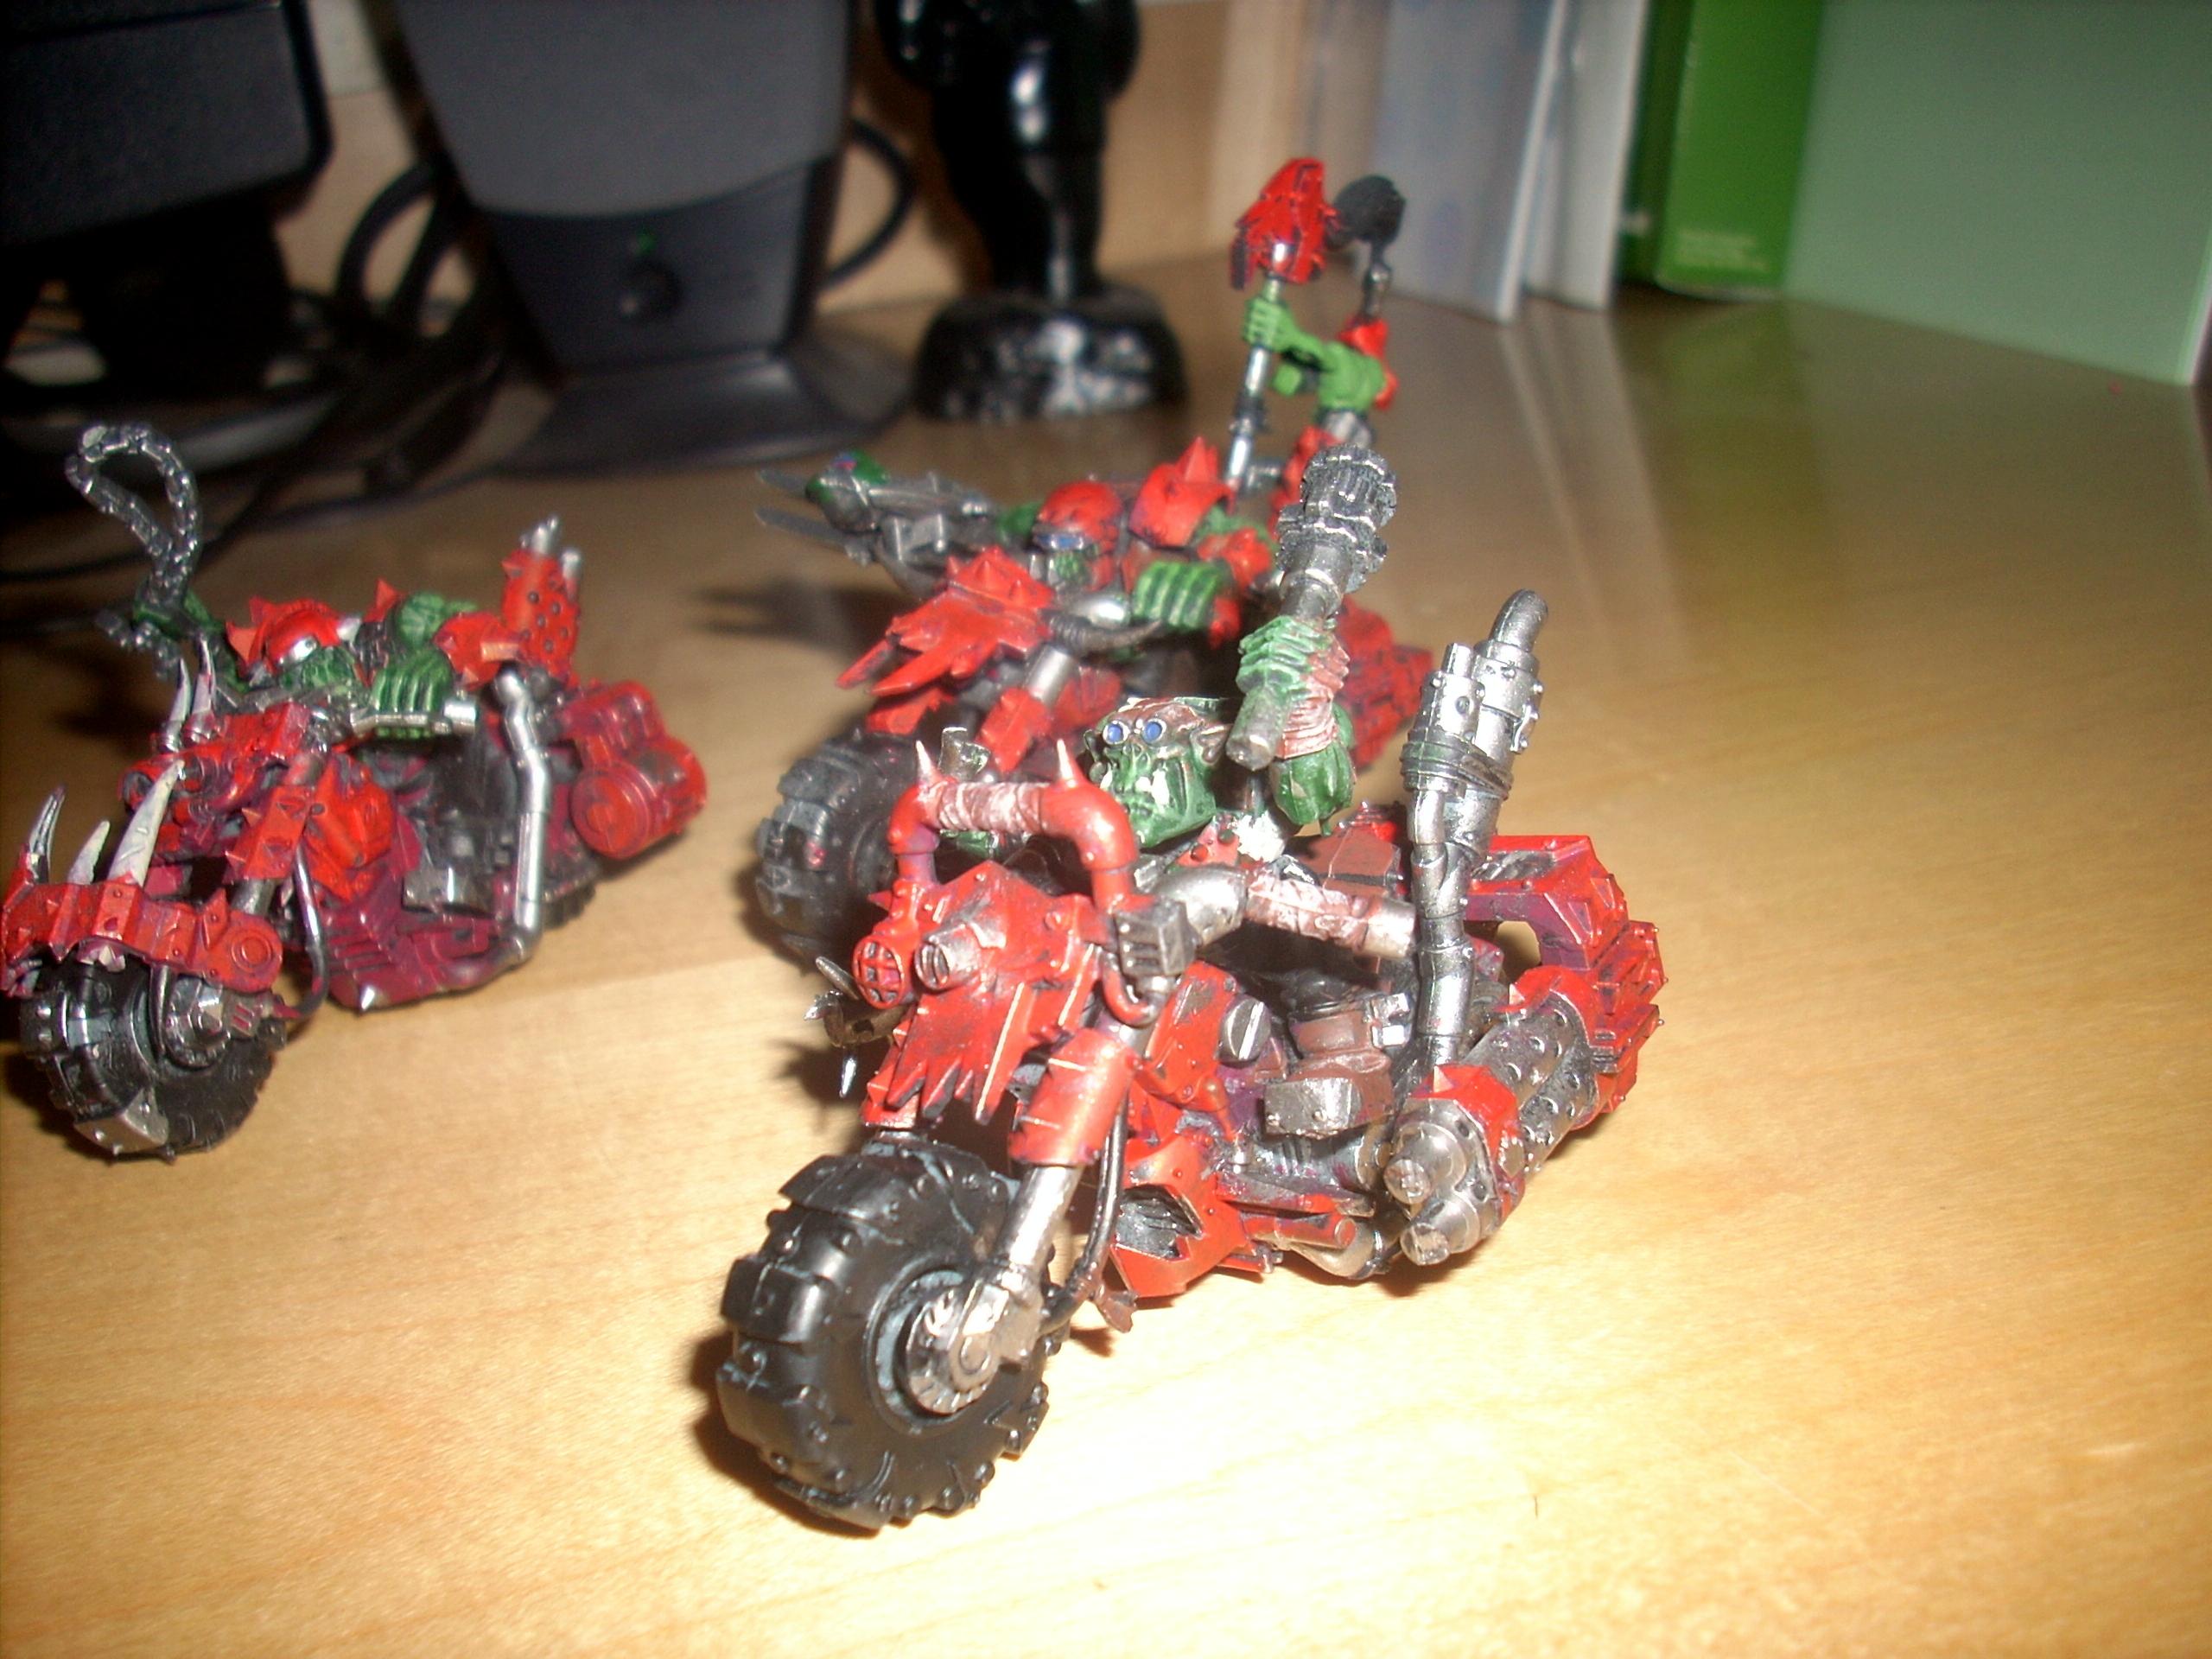 More evil Sunz warbikers